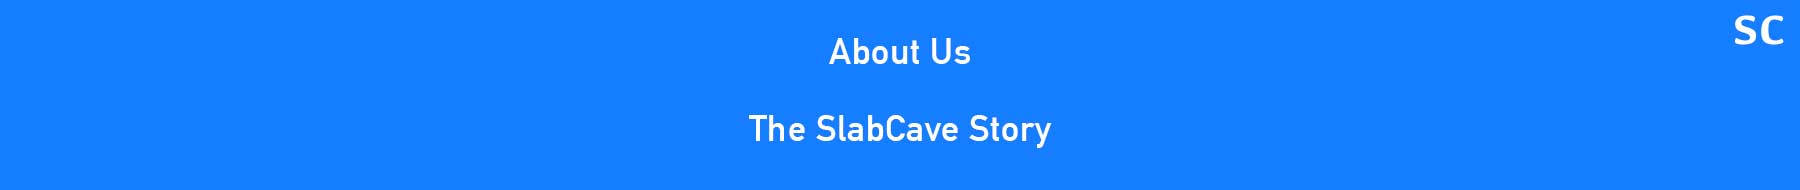 SlabCave: About Us - The SlabCave Story